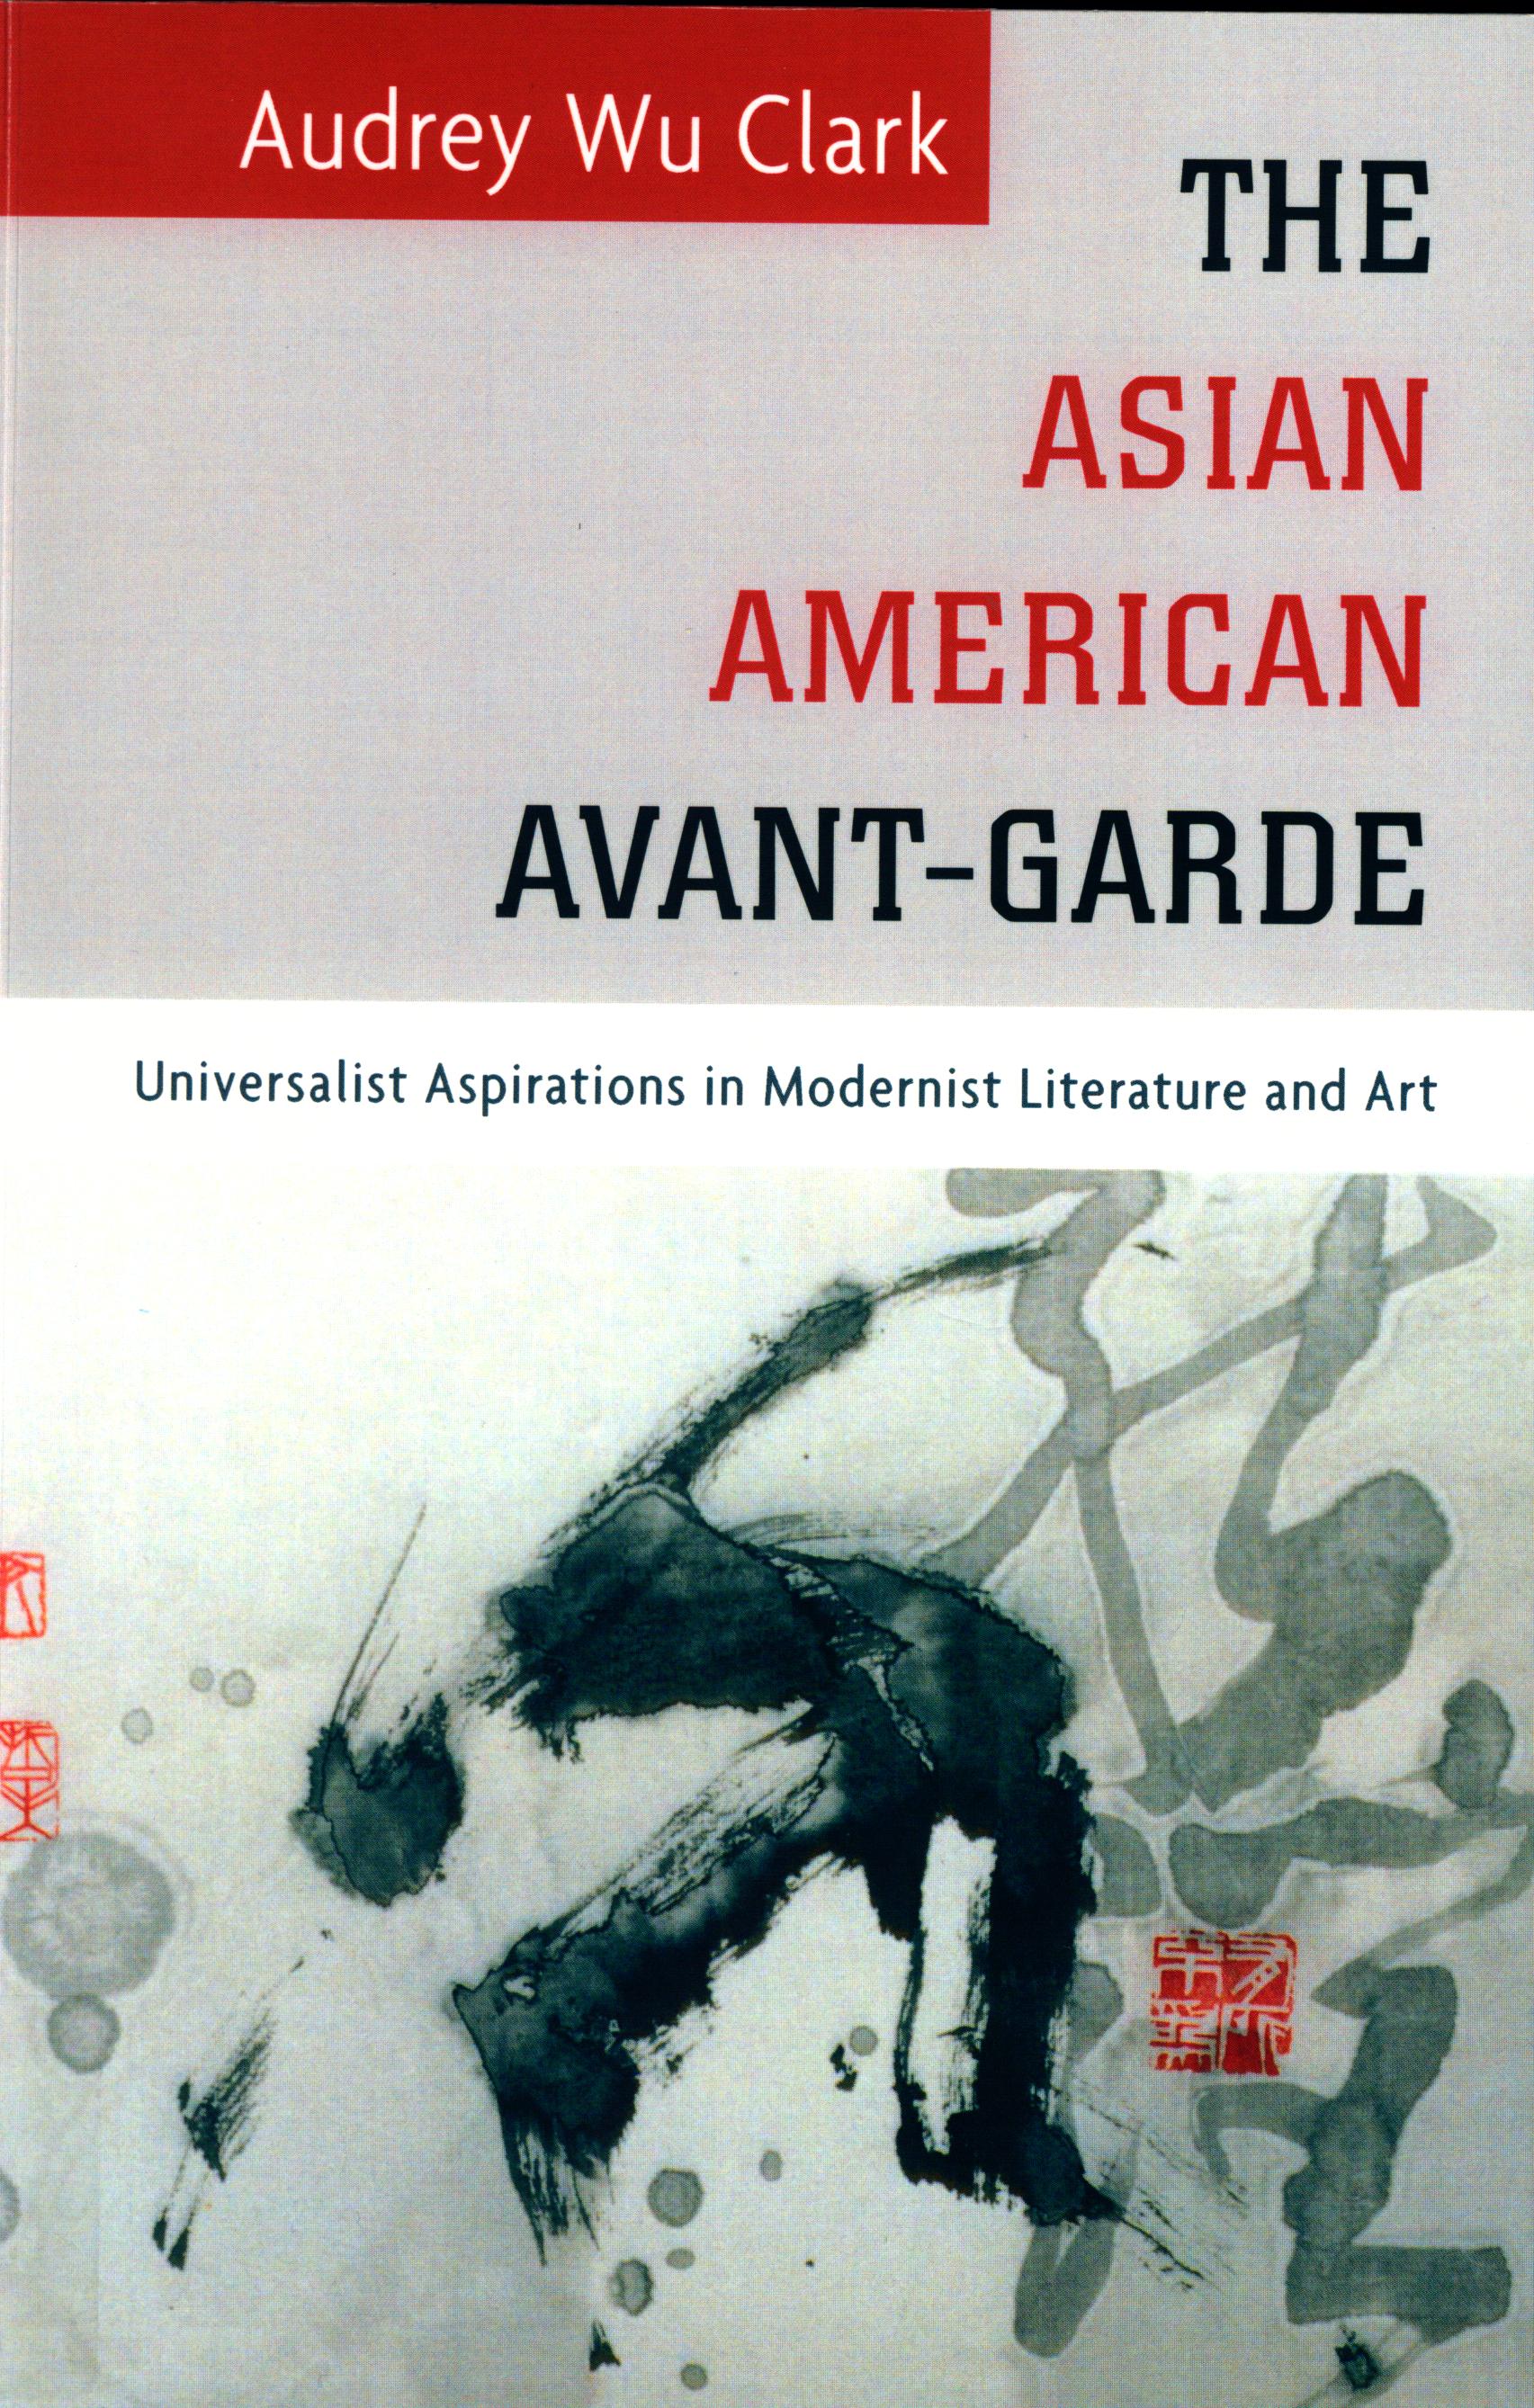 Cover Image of Asian American Avant-Garde: Universalist Aspirations in Modernist Literature and Art